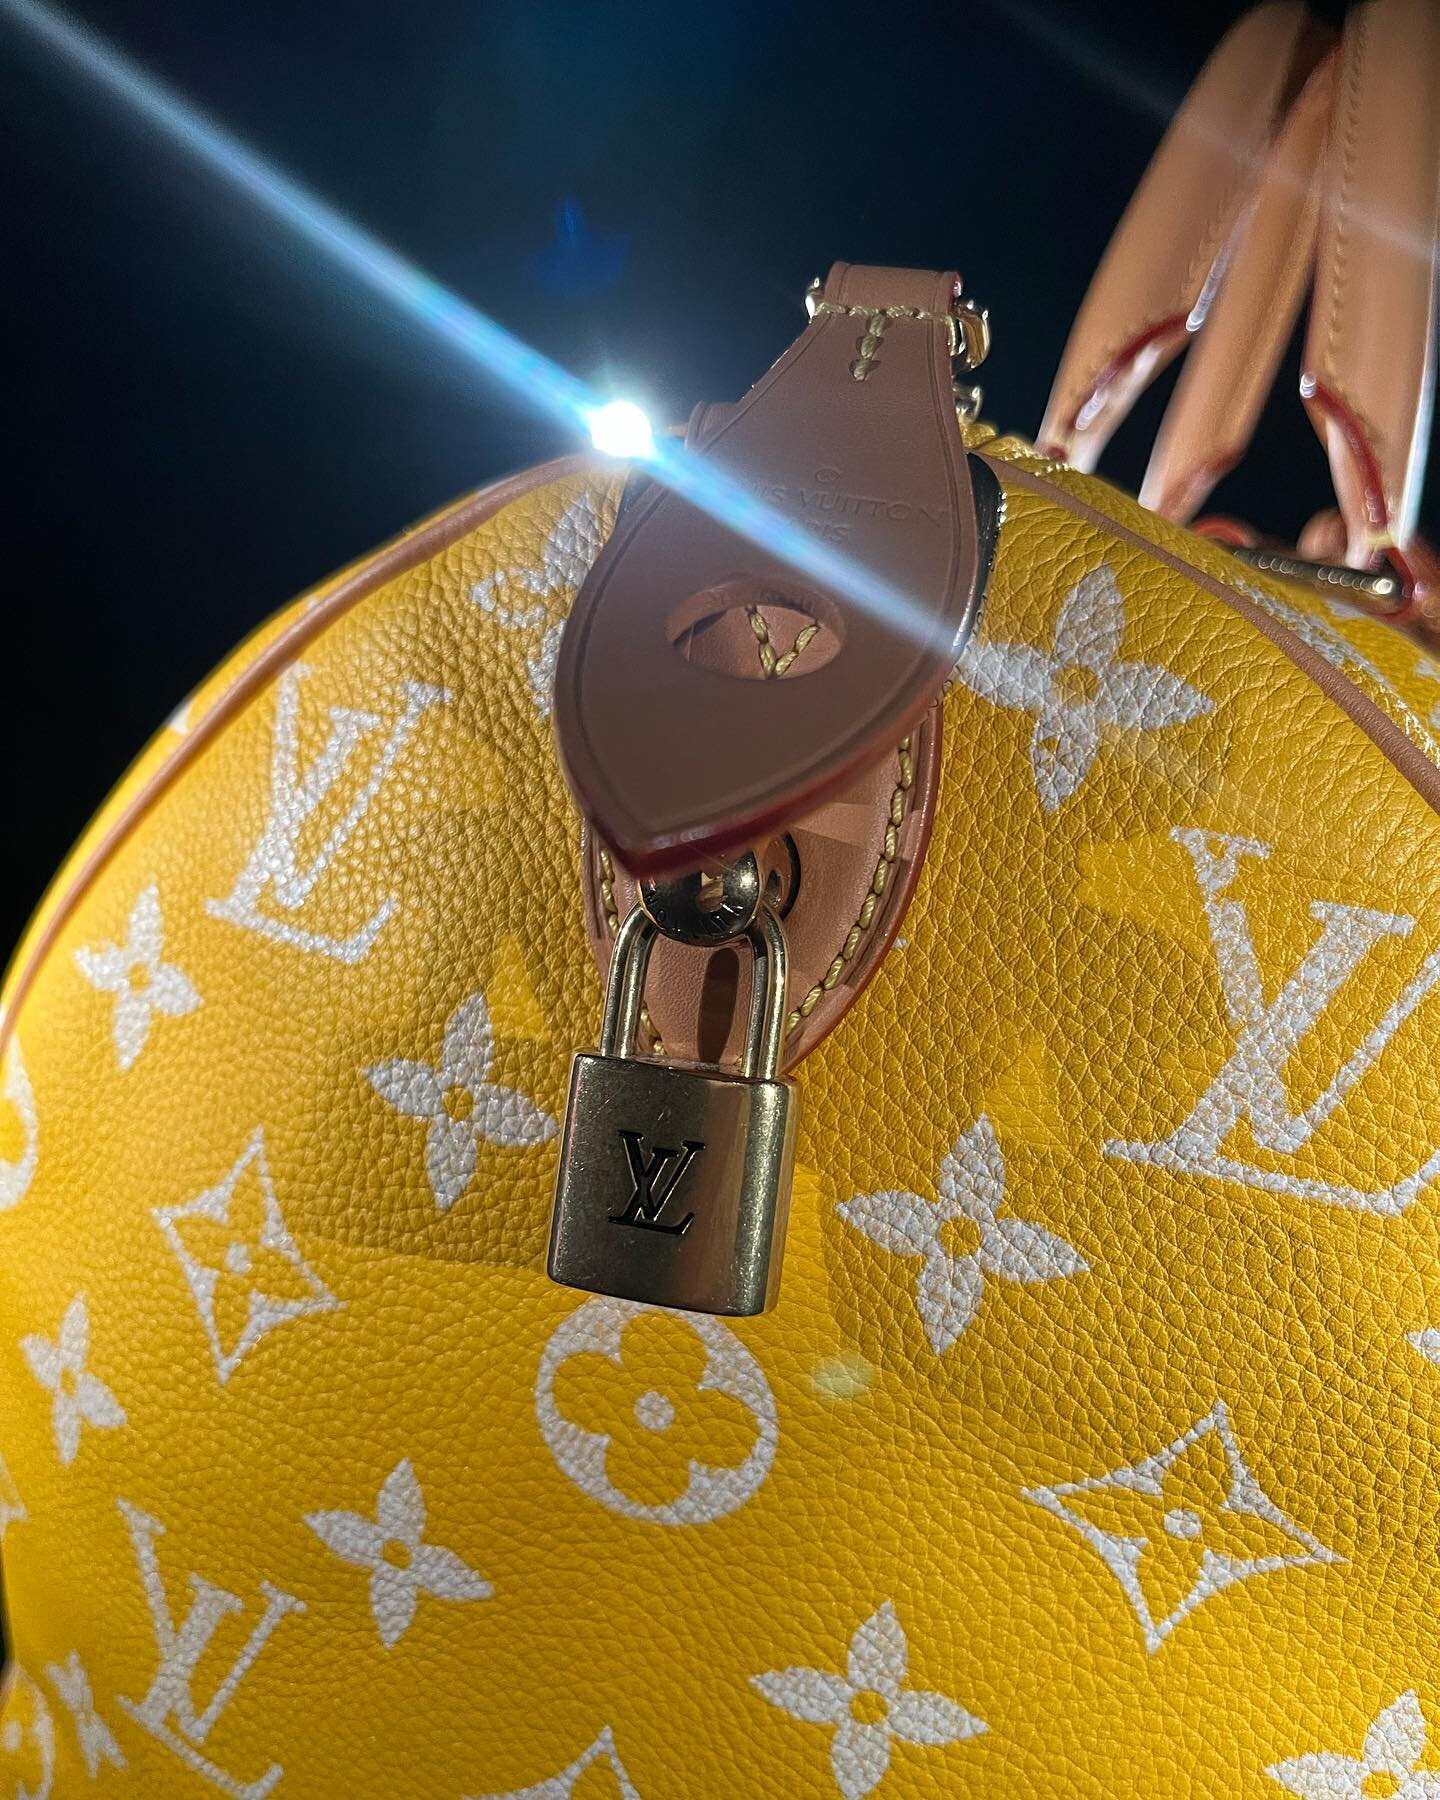 A closer look at @pharrell &lsquo;s @louisvuitton first collection drop in #NYC&hellip; @reveriepage 

#louisvuitton #louisvuittonbag #louisvuittonshoes #louisvuittonlover #loverslv #lvlovers #pharrellwilliams #pharrell #digicamoprint #digicamo #bill